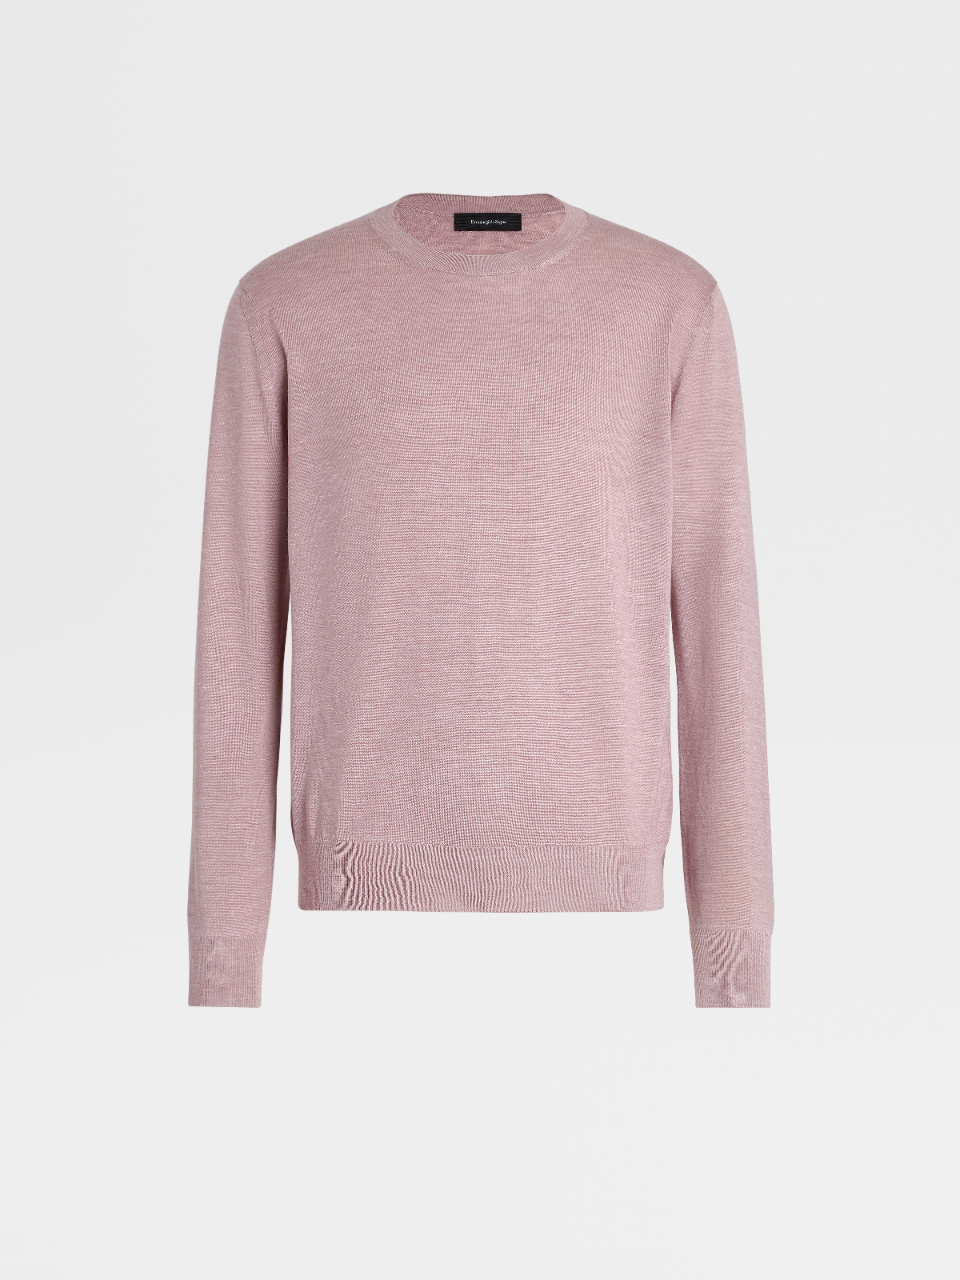 Red Faded Silk Cashmere and Linen Knit Crewneck